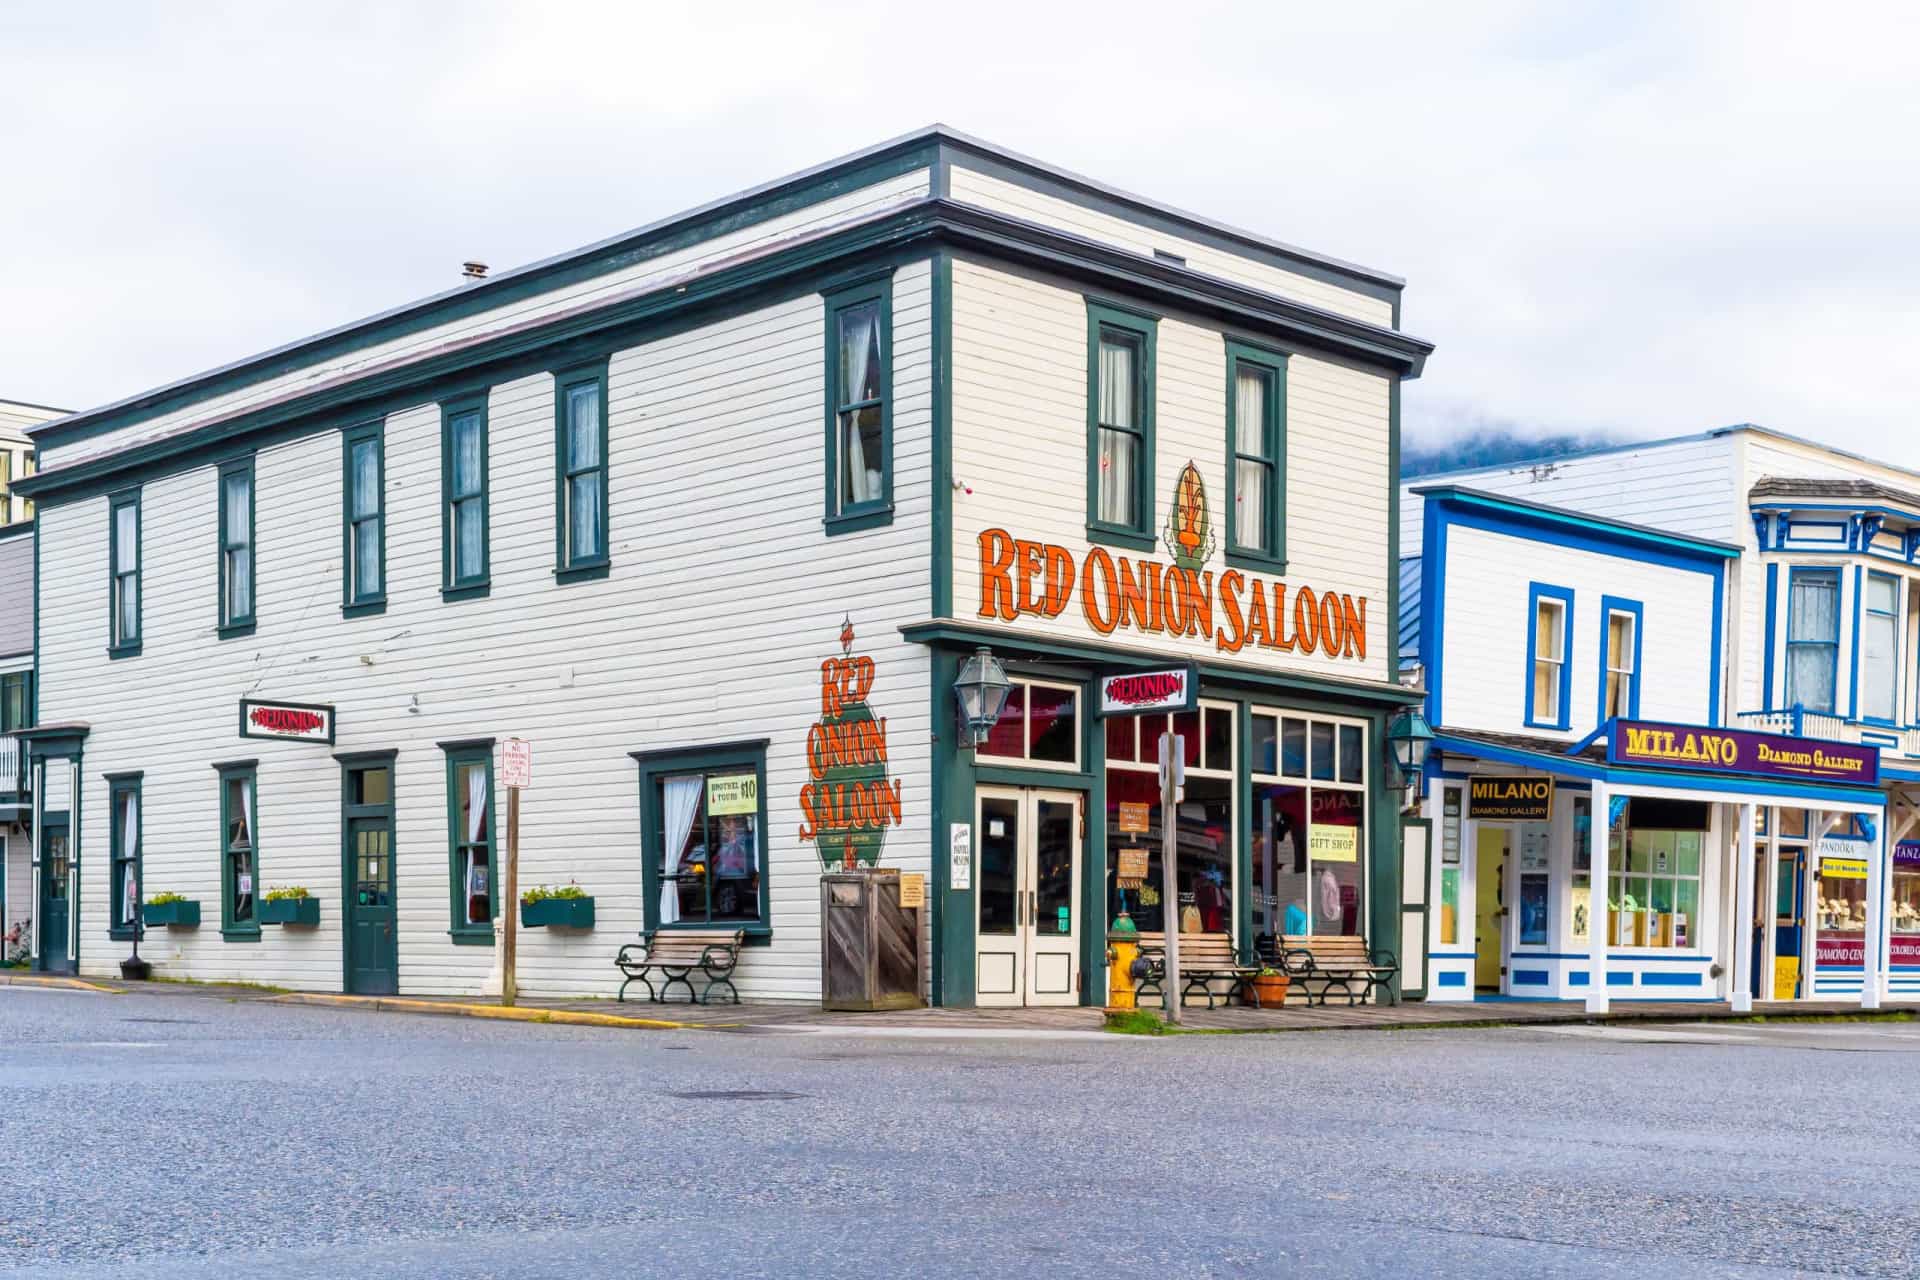 <p>You can now pop into the Red Onion Saloon in Skagway for some food, but back in 1897 the saloon also worked as a dance hall and brothel. The Saloon is said to be haunted by Lydia—one of the sex workers. </p>